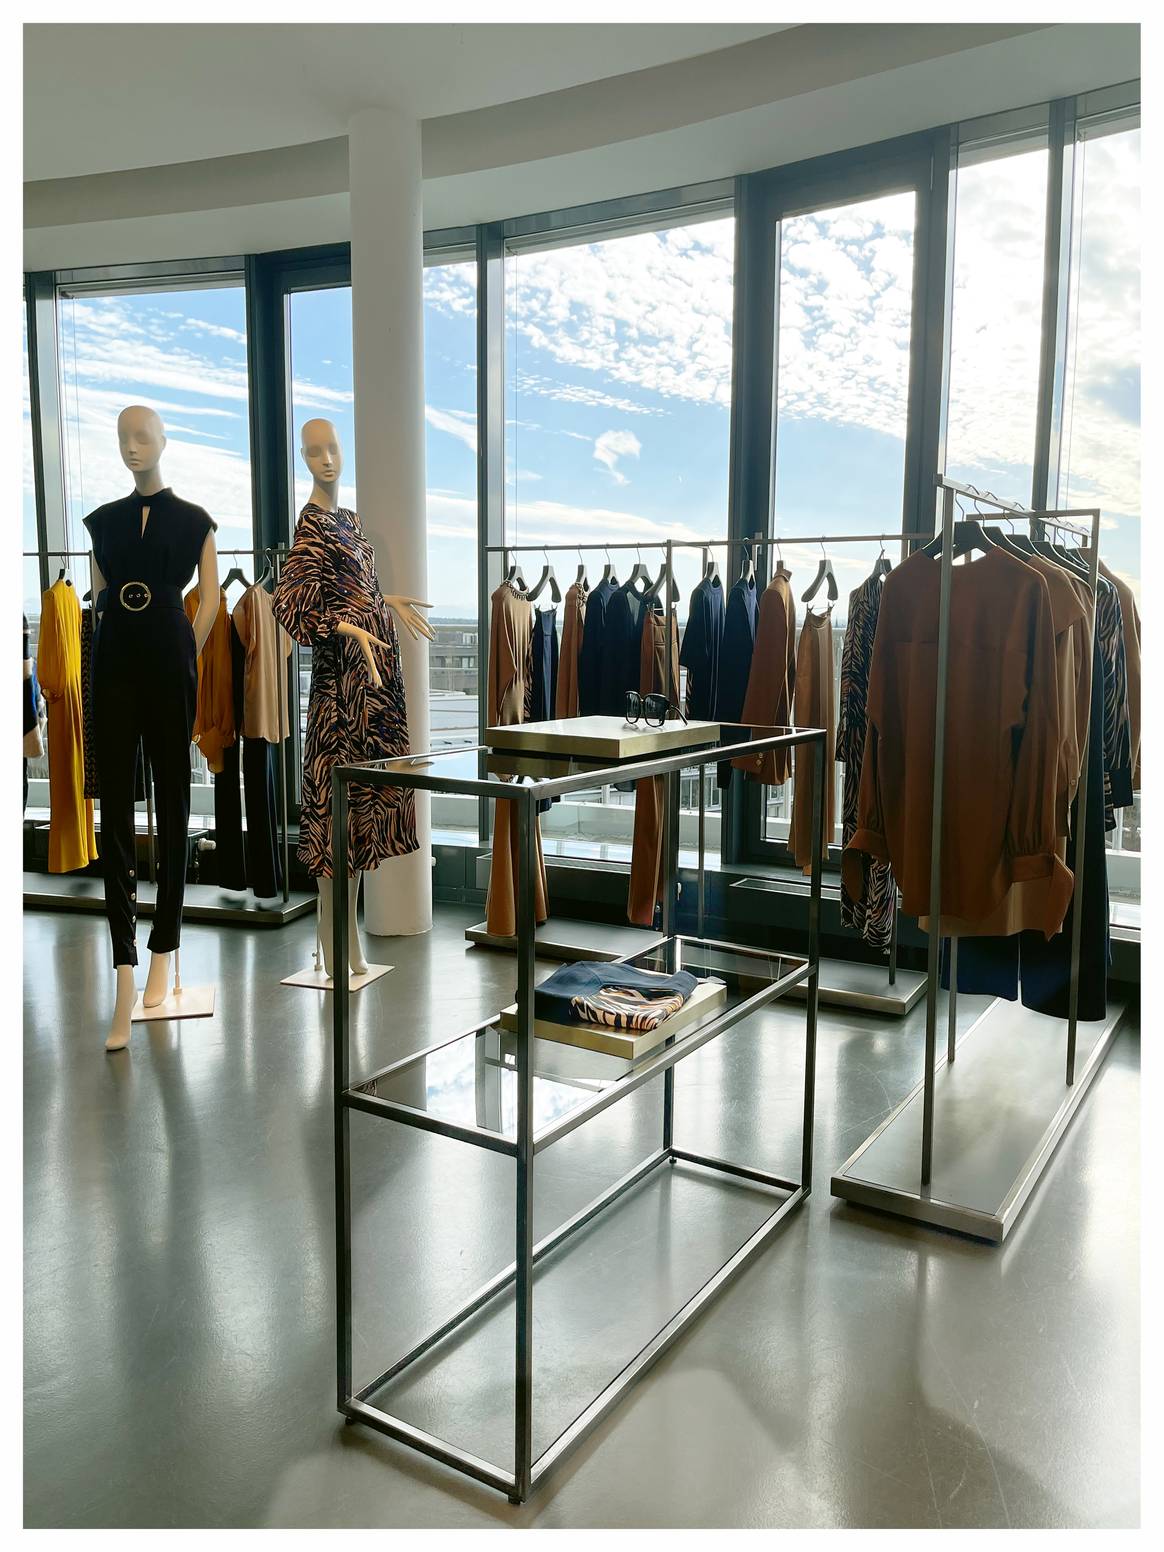 Picture: the new ESCADA showroom in Munich, Germany, courtesy of the brand